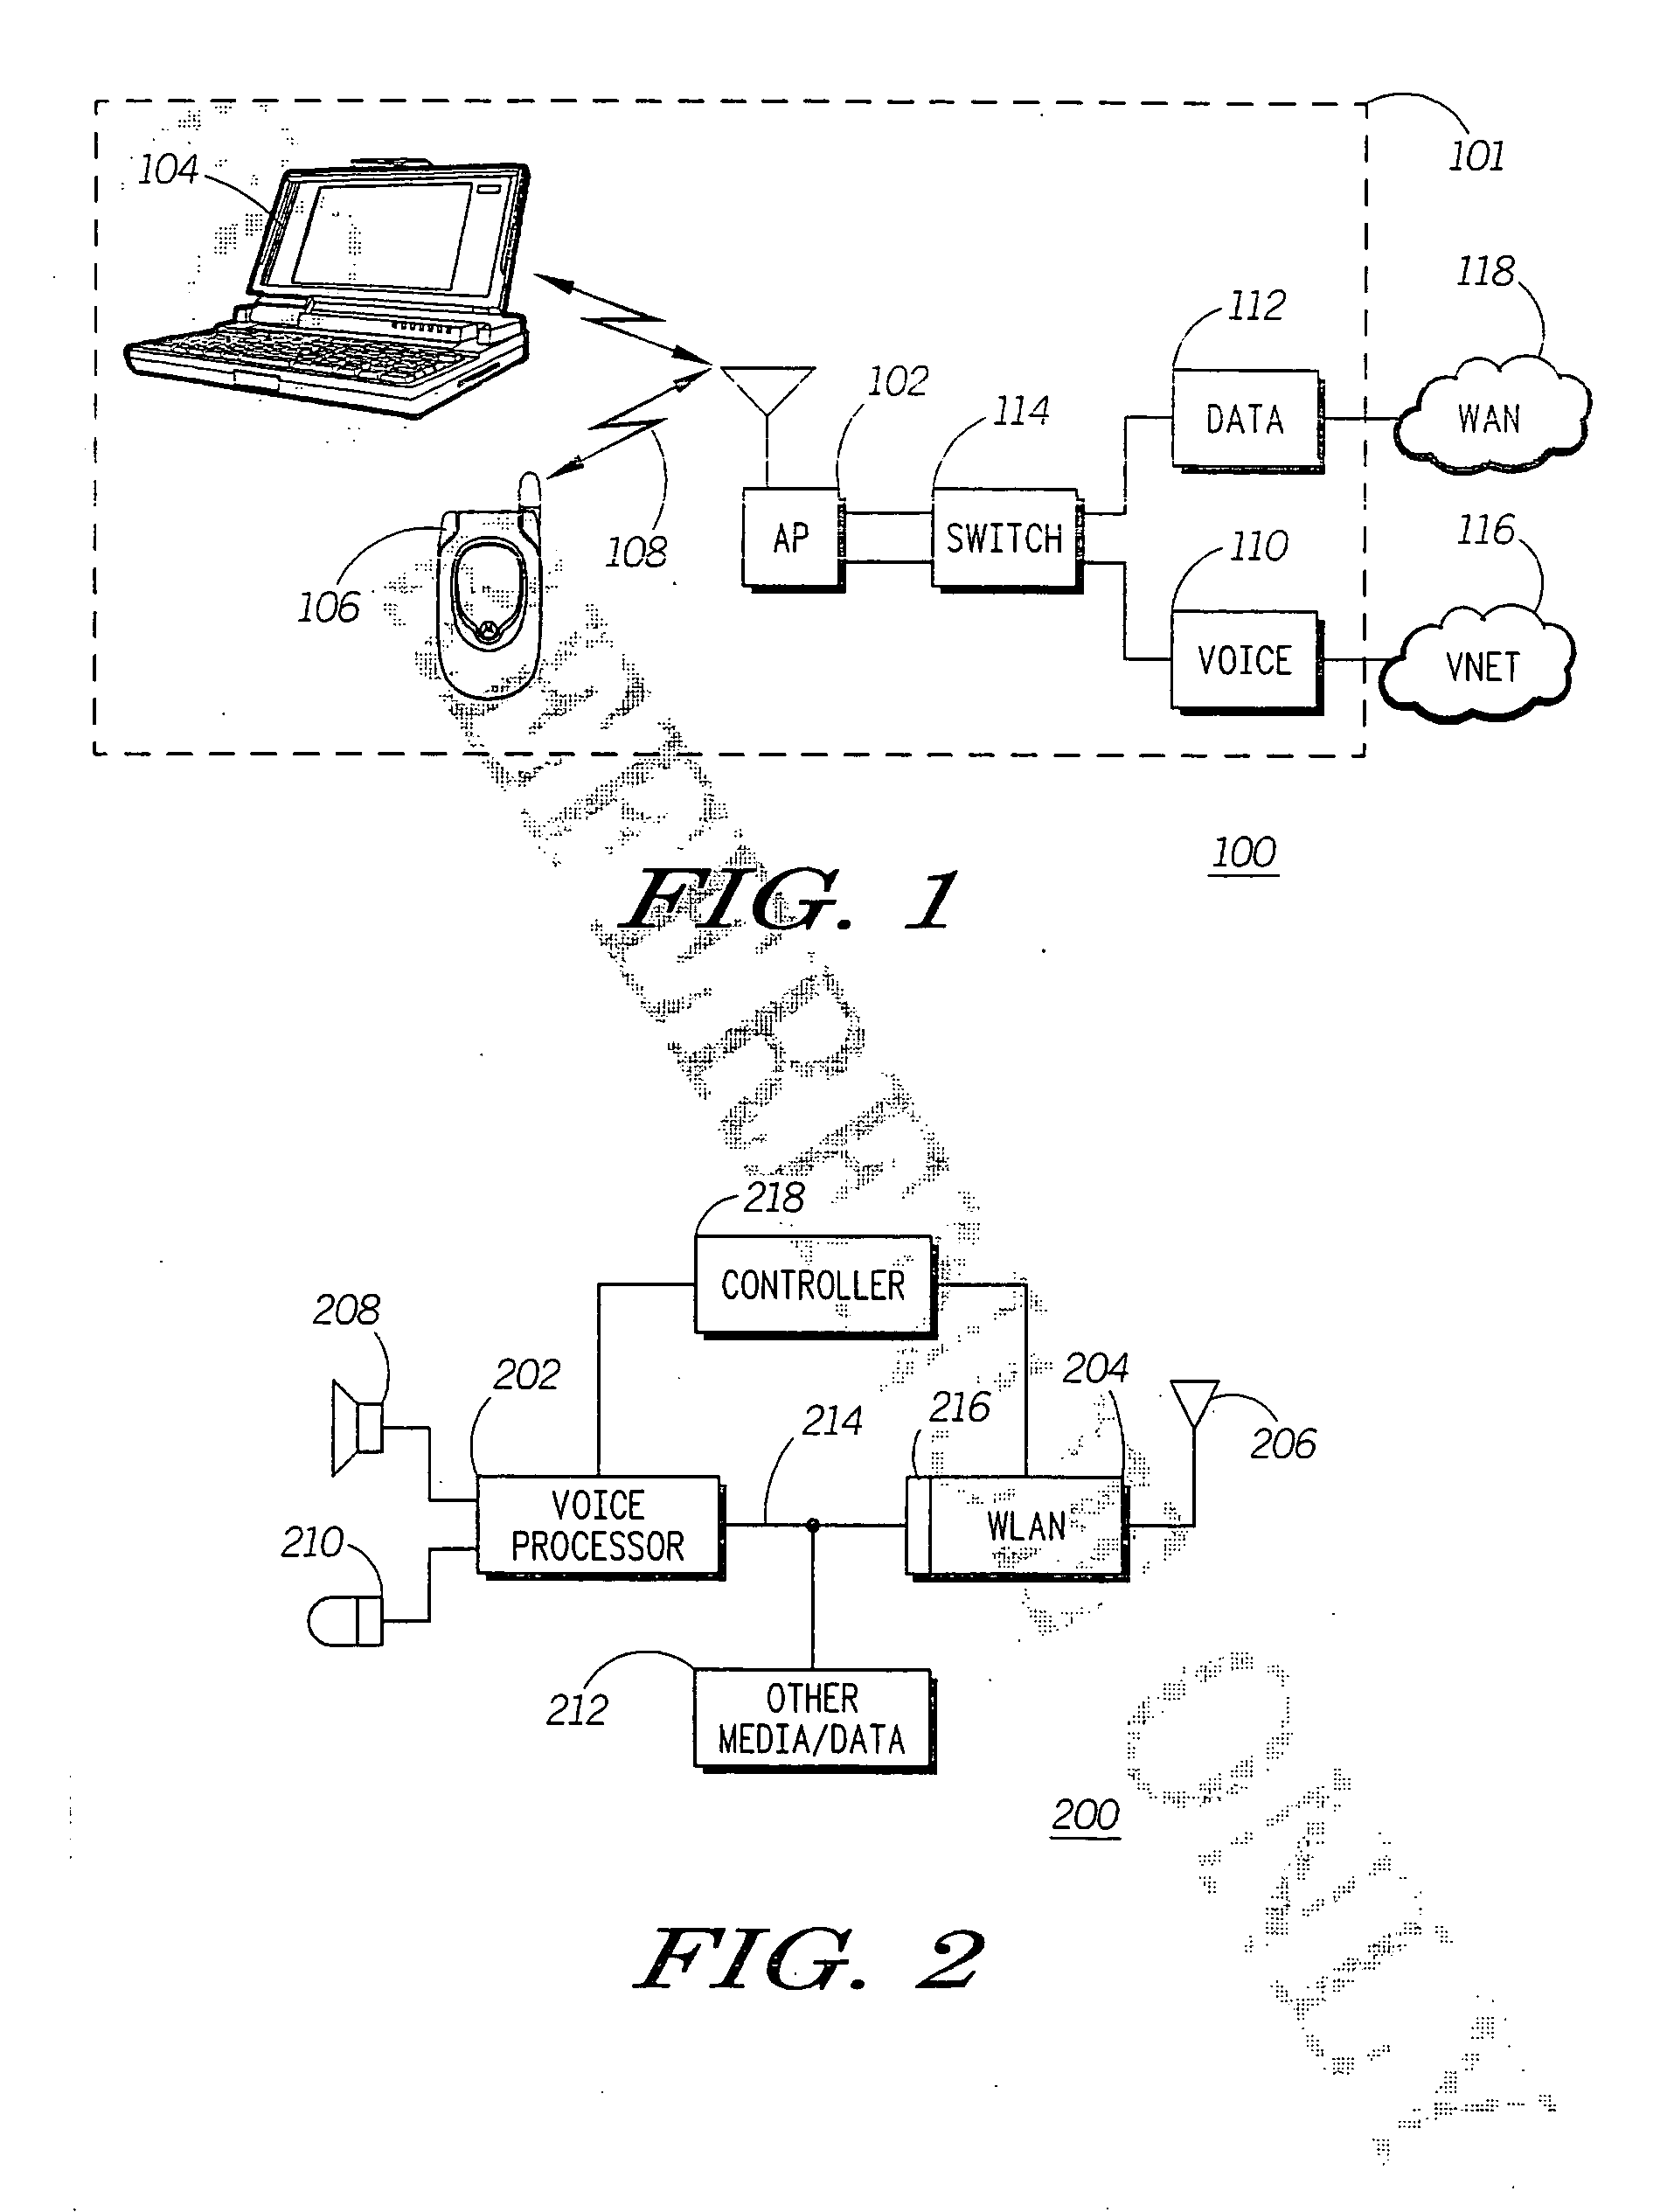 Method for indicating buffer status in a WLAN access point